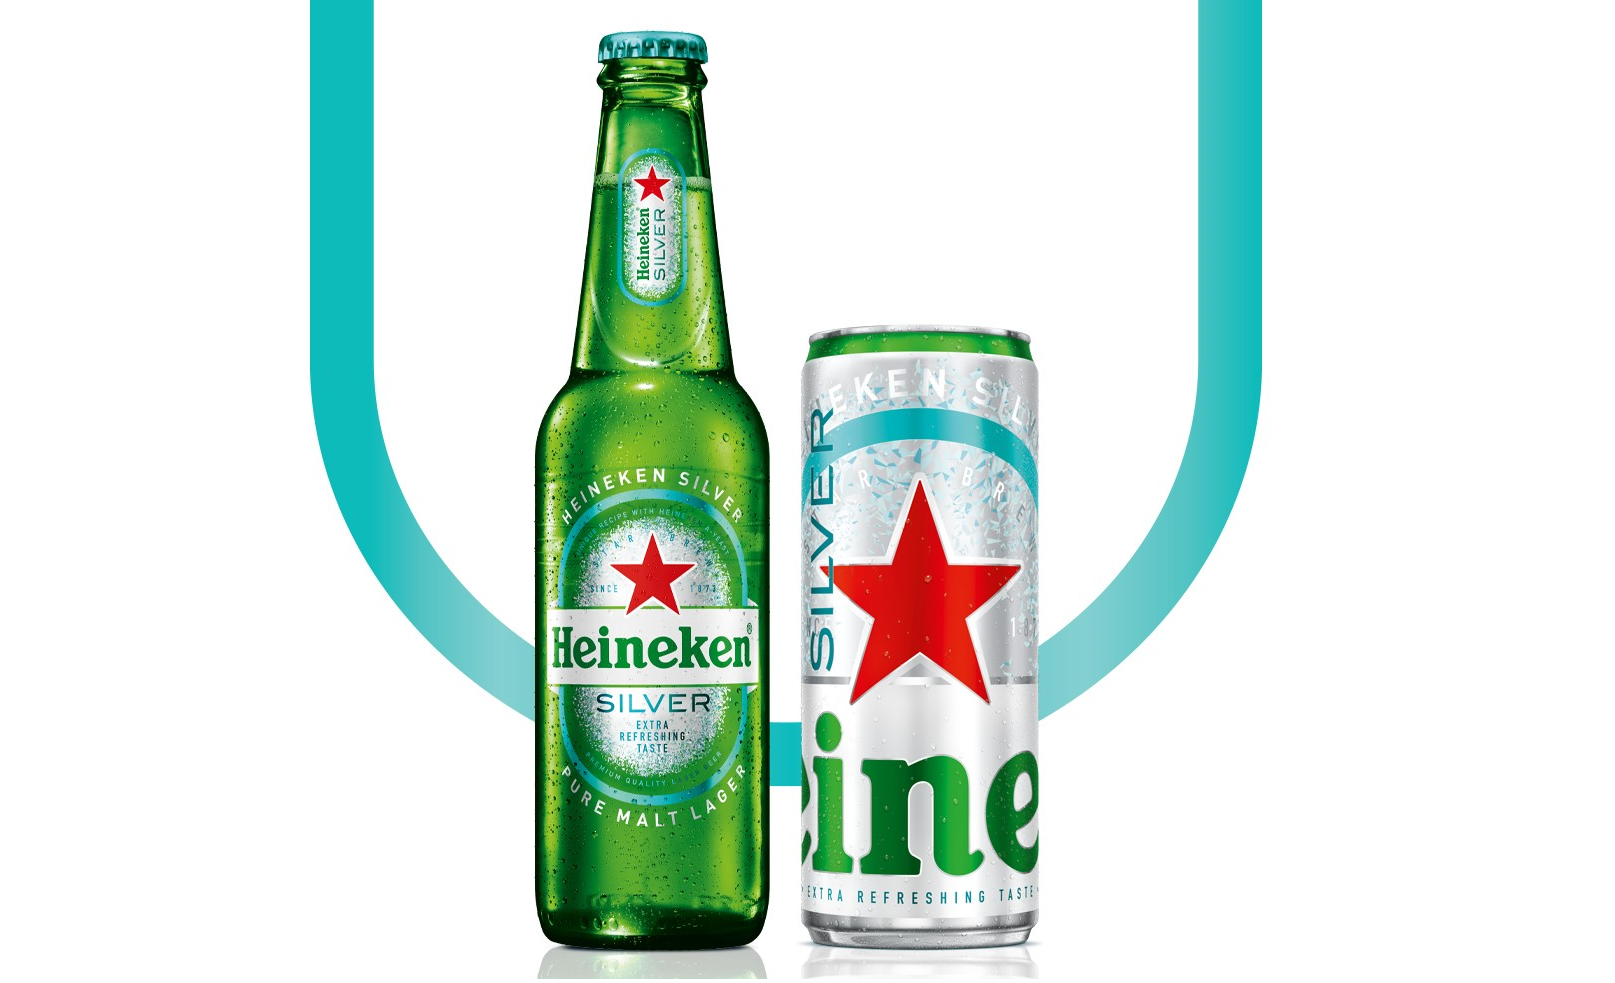 New lager is one of Heineken's biggest launches of recent years